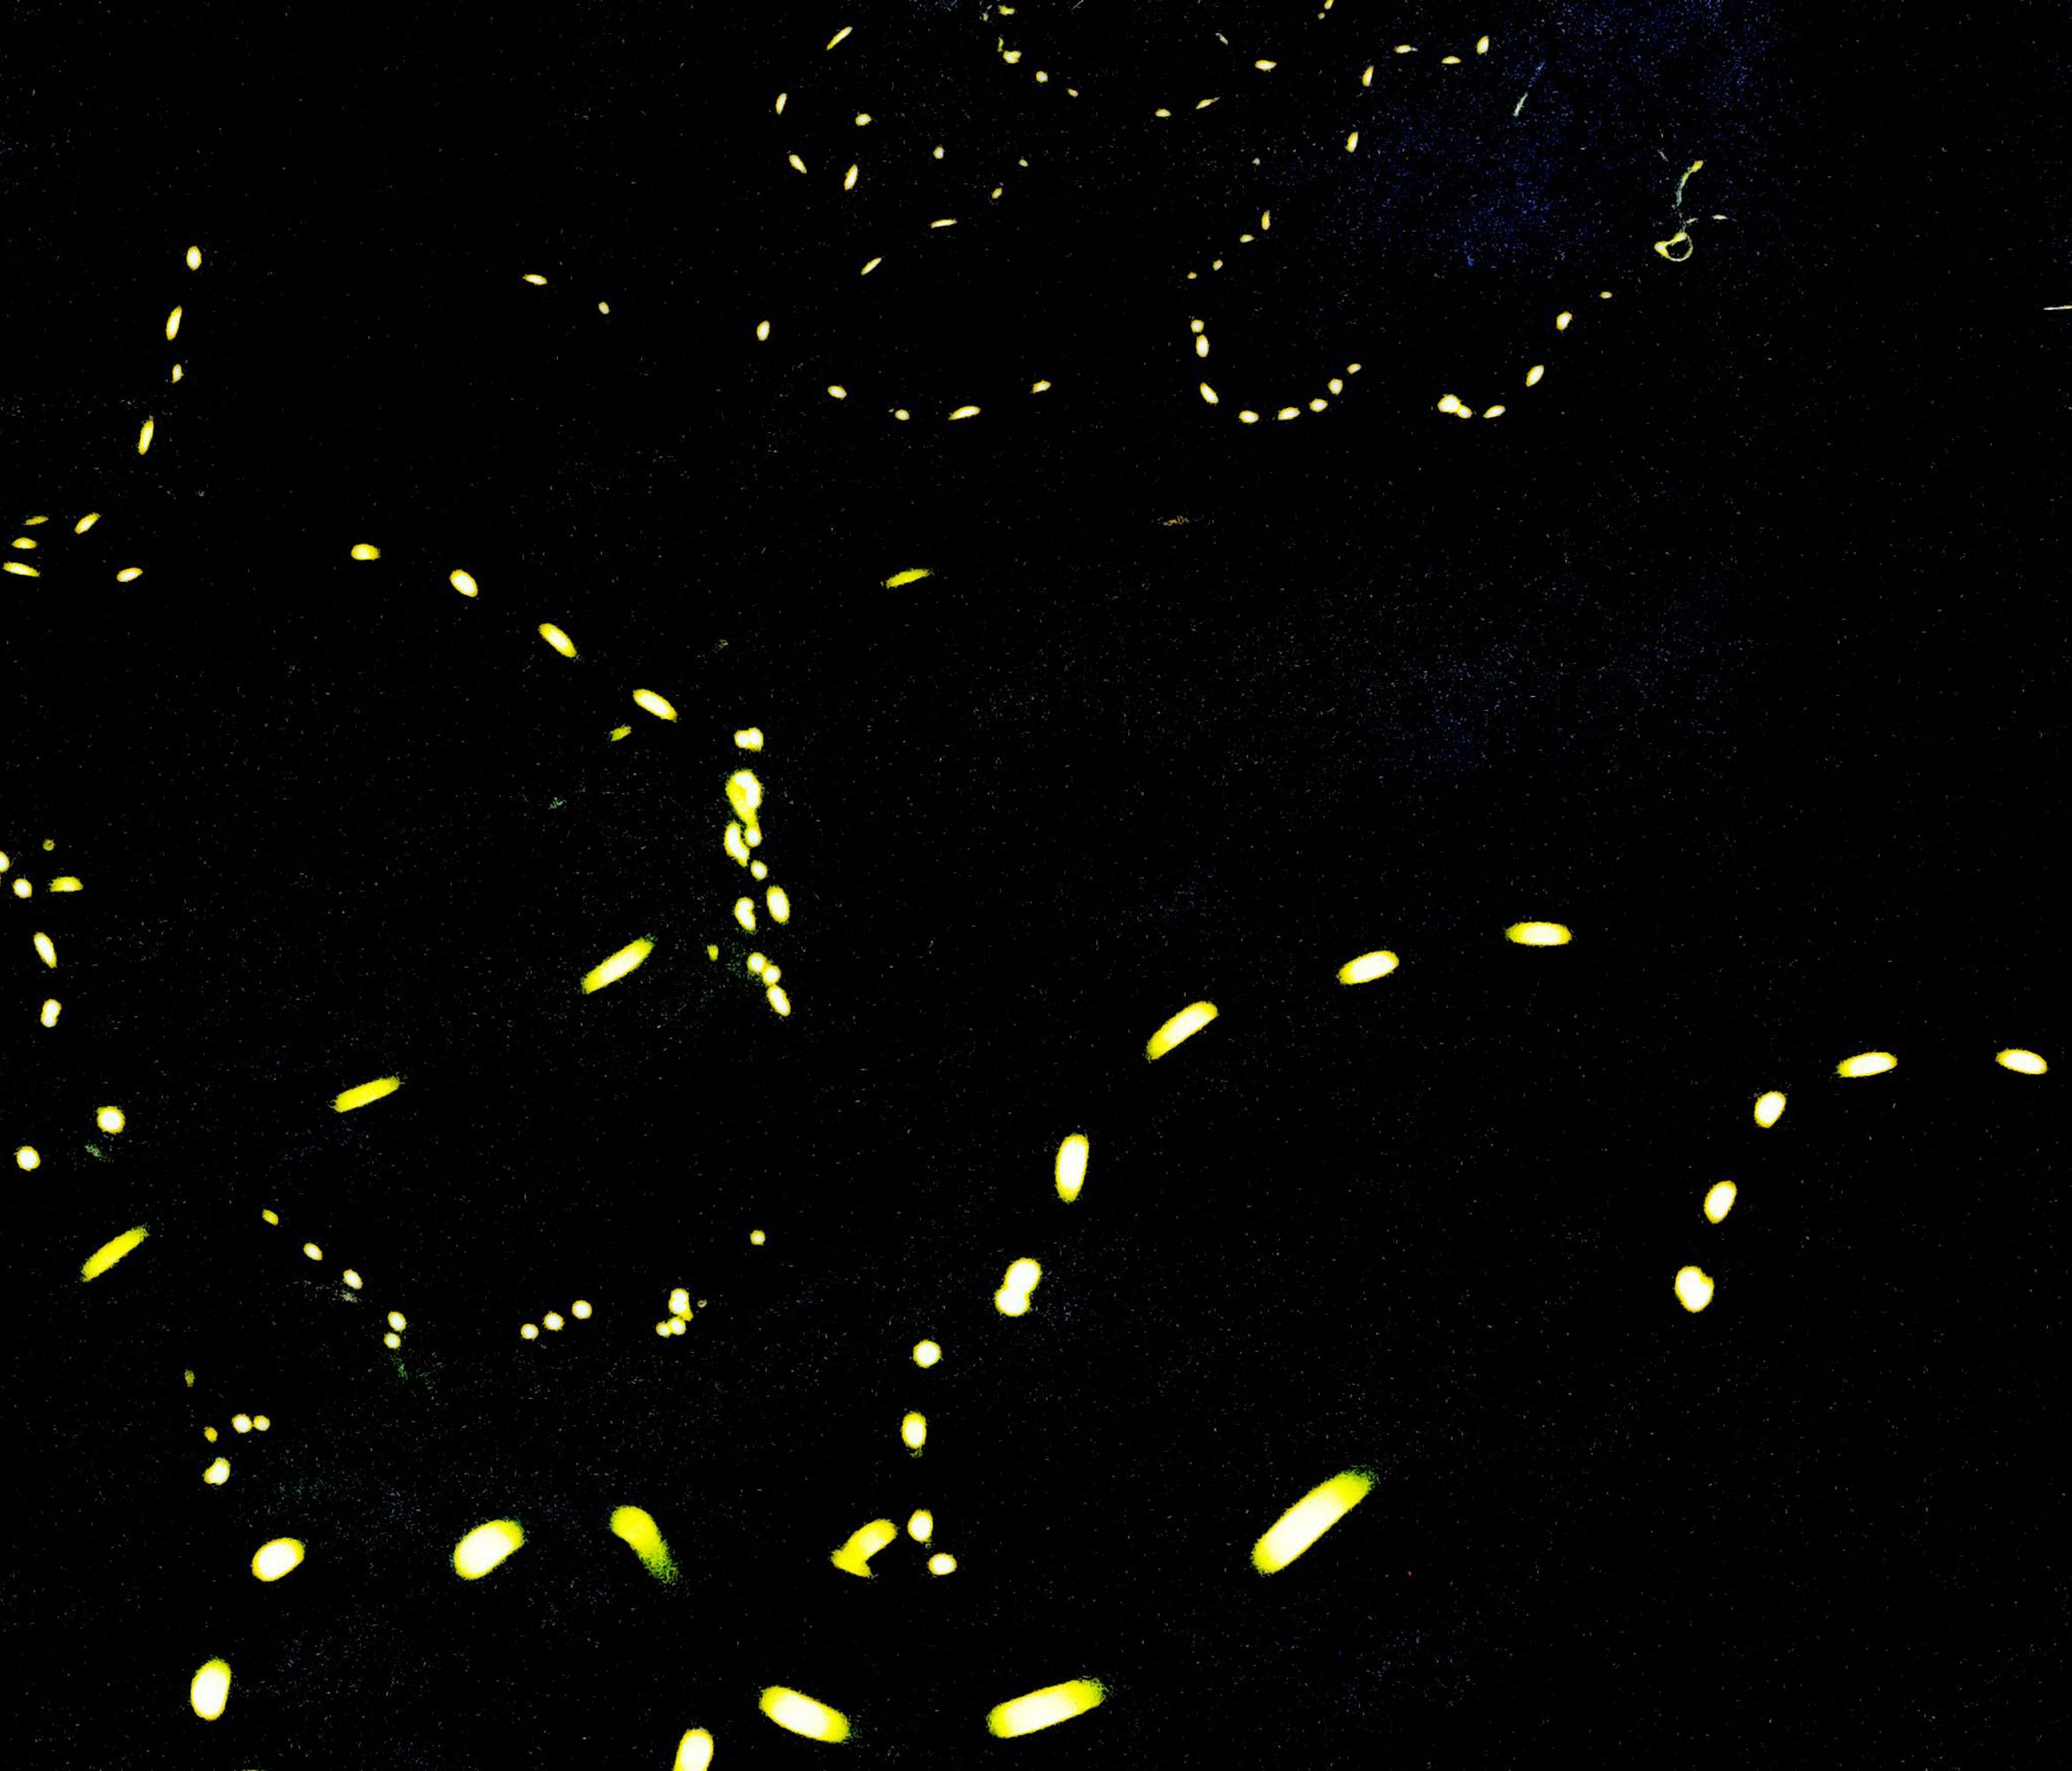 Fireflies blink simultaneously through the woods June 13, 2018, at Elkmont Campground in Great Smoky Mountains National Park near  Gatlinburg, Tennessee. The synchronized flashes are part of the photinus carolinus firefly's mating ritual.